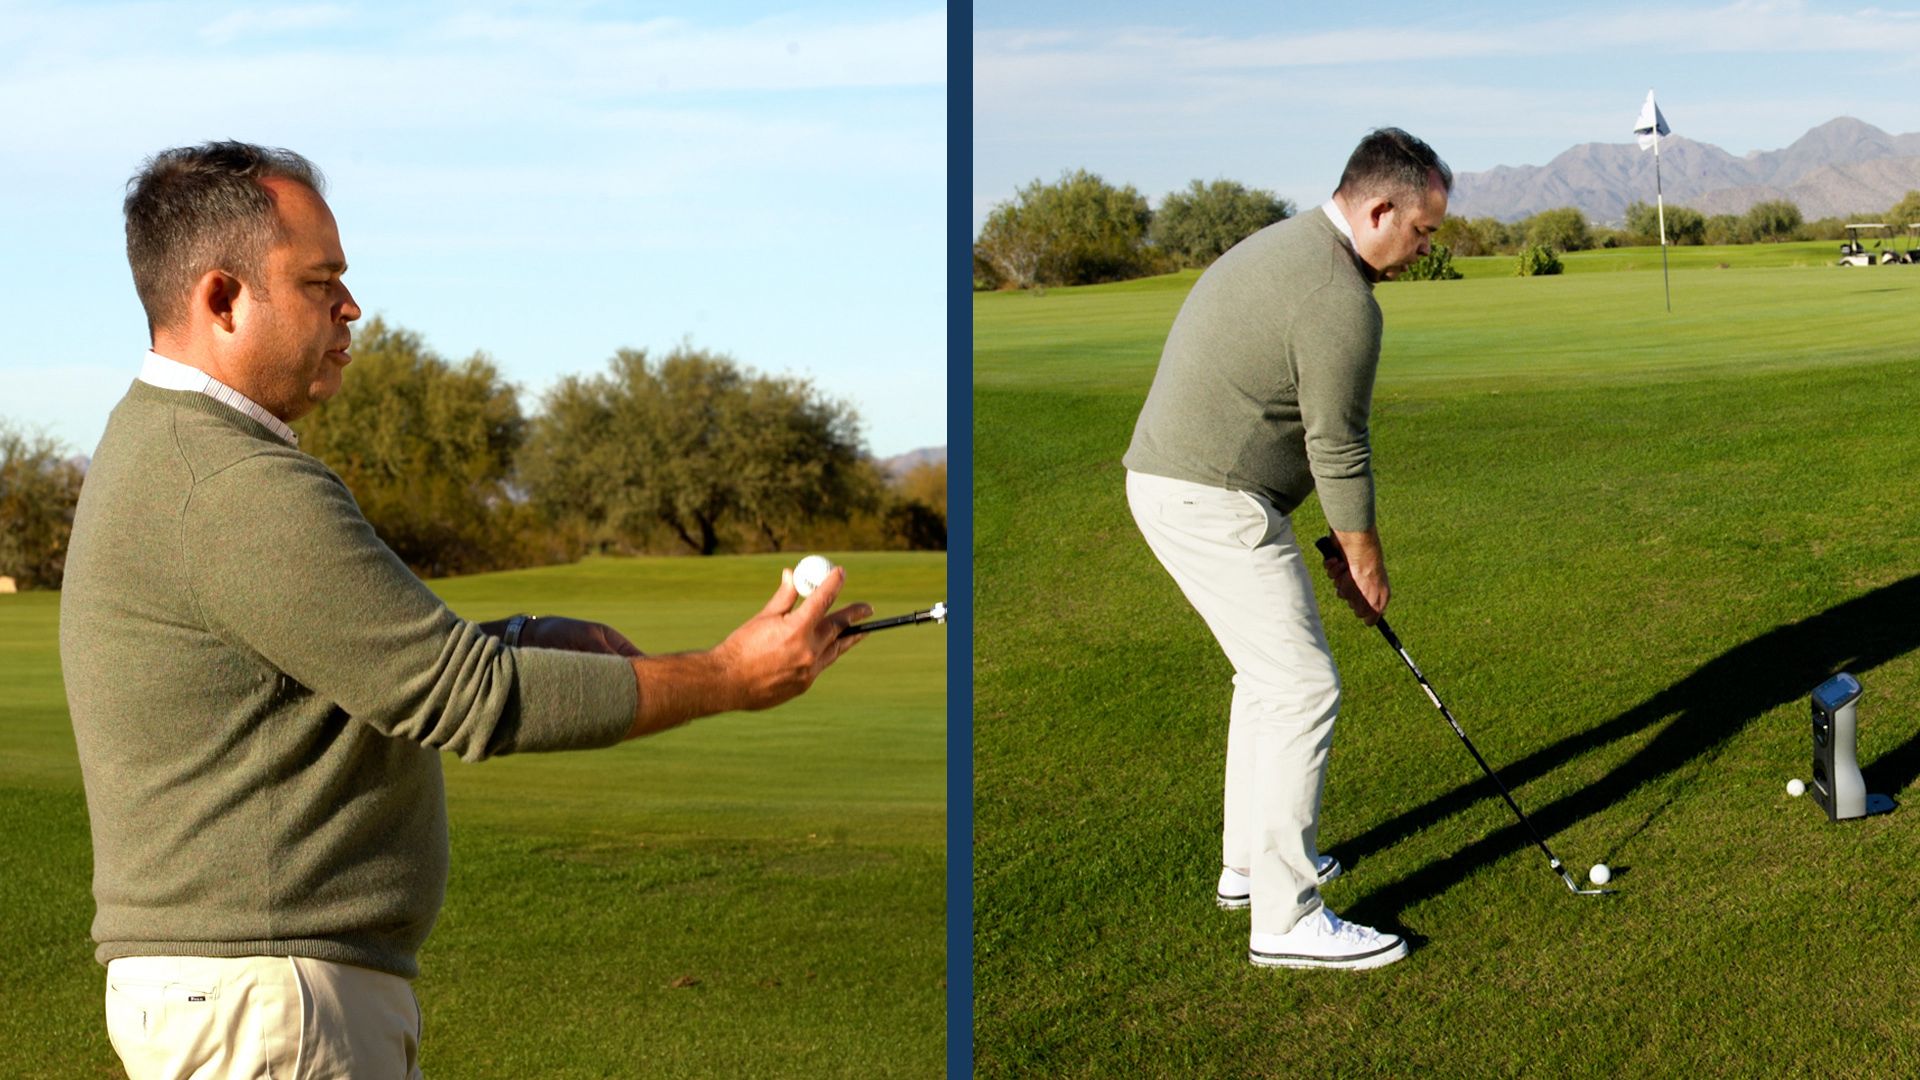 Opening the clubface? Here's how it should feel when hitting your wedge shots